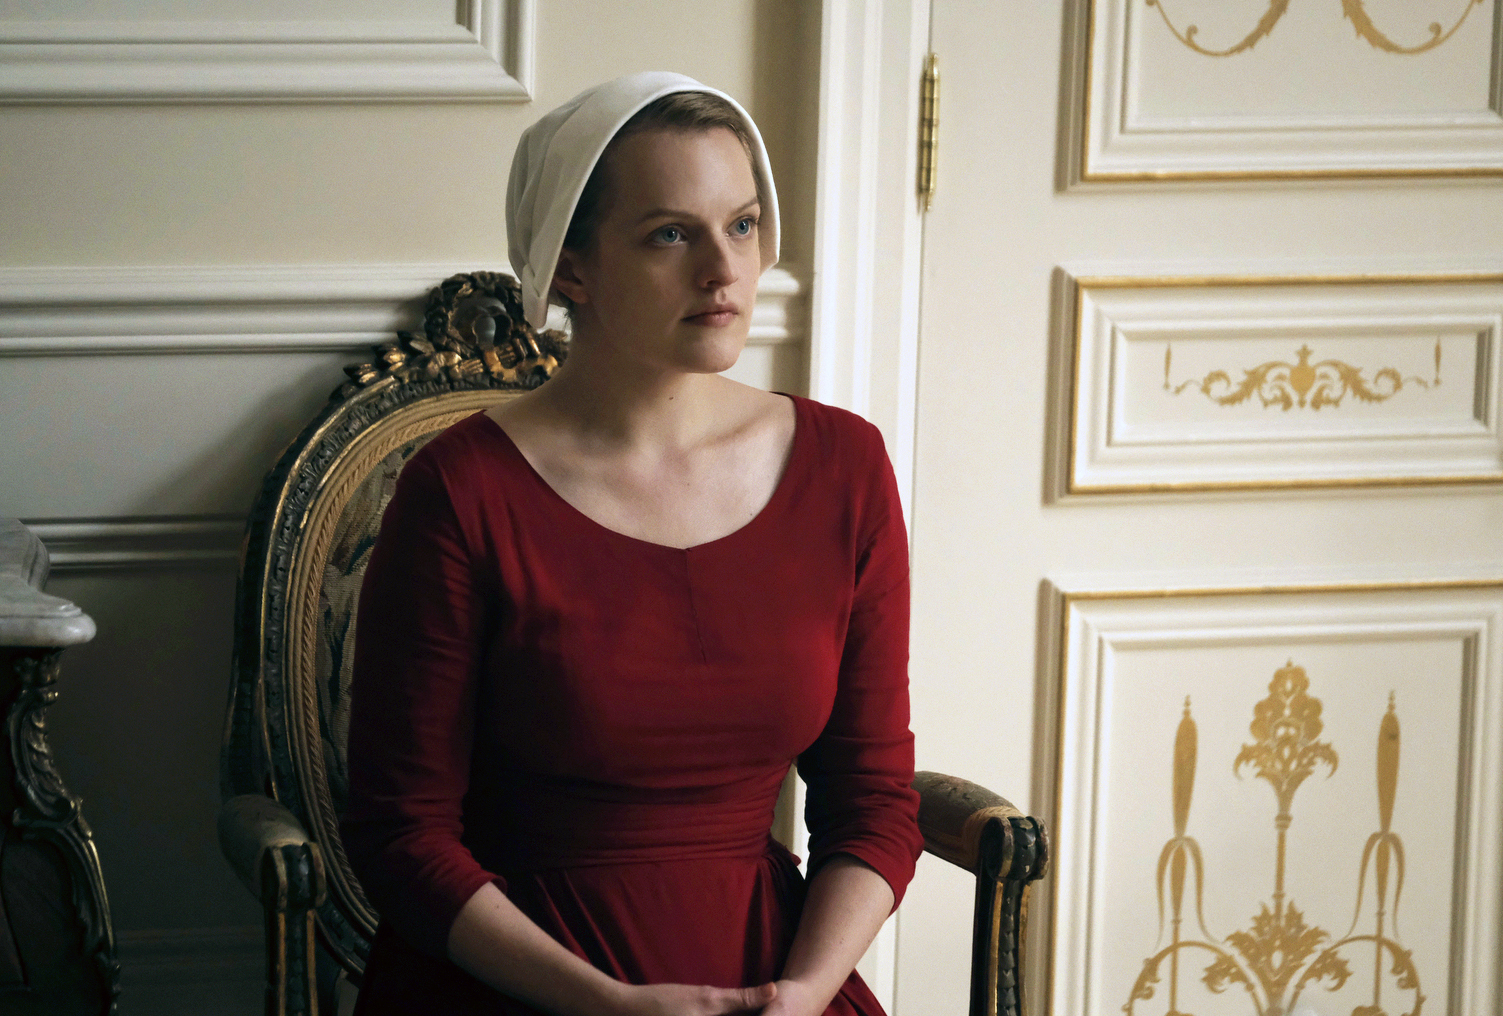 PHOTO: This image released by Hulu shows Elisabeth Moss as Offred in a scene from, "The Handmaid's Tale," premiering Wednesday on Hulu with three episodes. The remaining seven hours will be released each Wednesday thereafter.